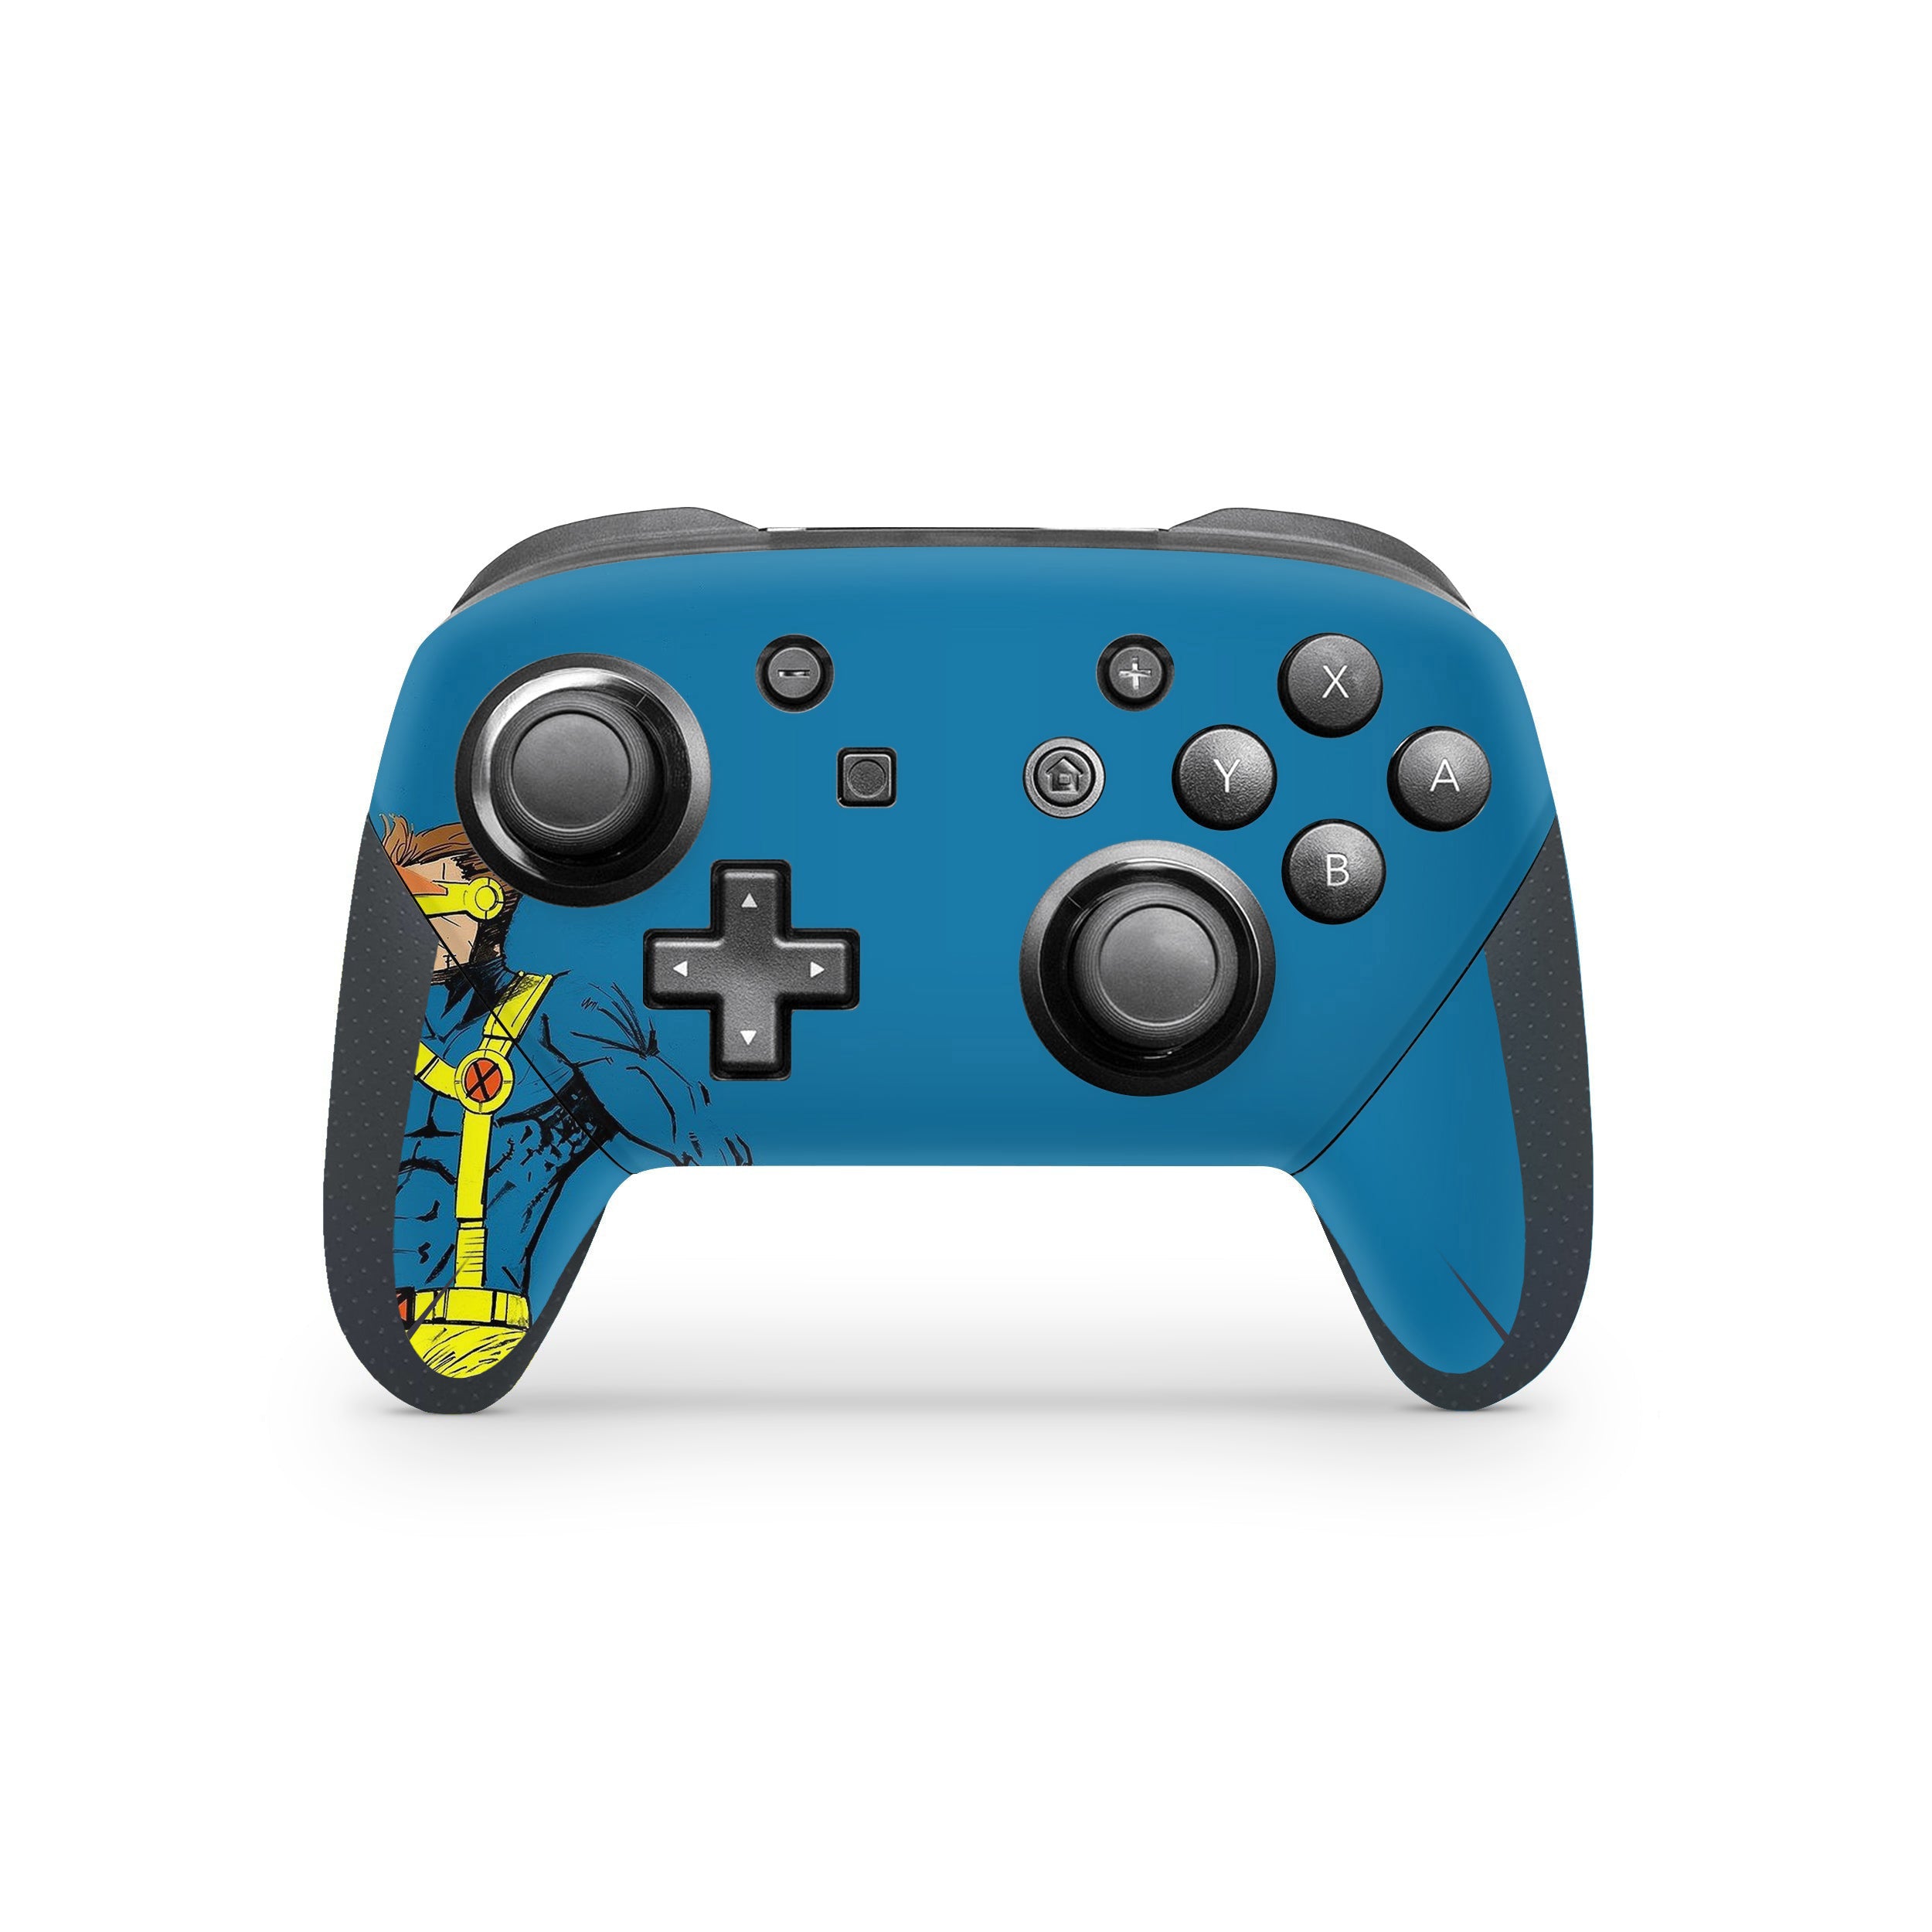 A video game skin featuring a Marvel X Men Cyclops design for the Switch Pro Controller.